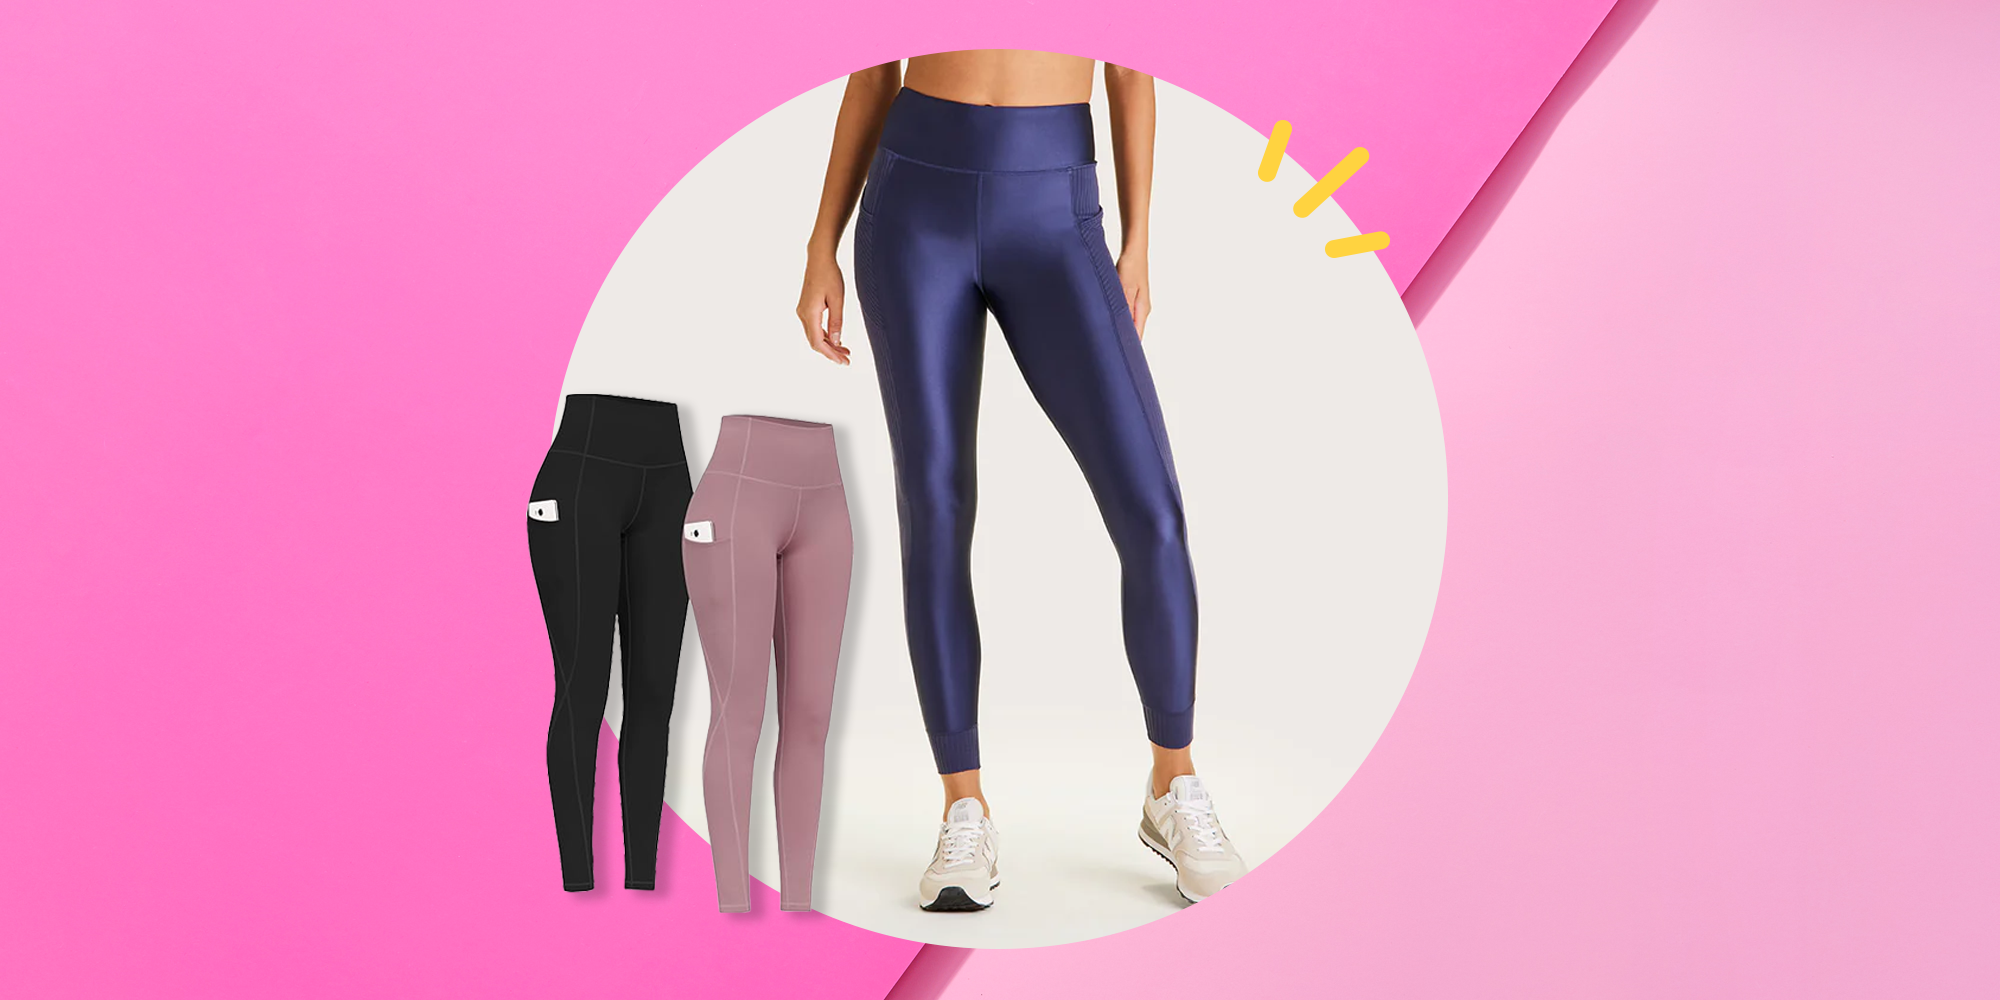 Leggings vs Tights vs Yoga Pants: What's the Difference? | Be Blog